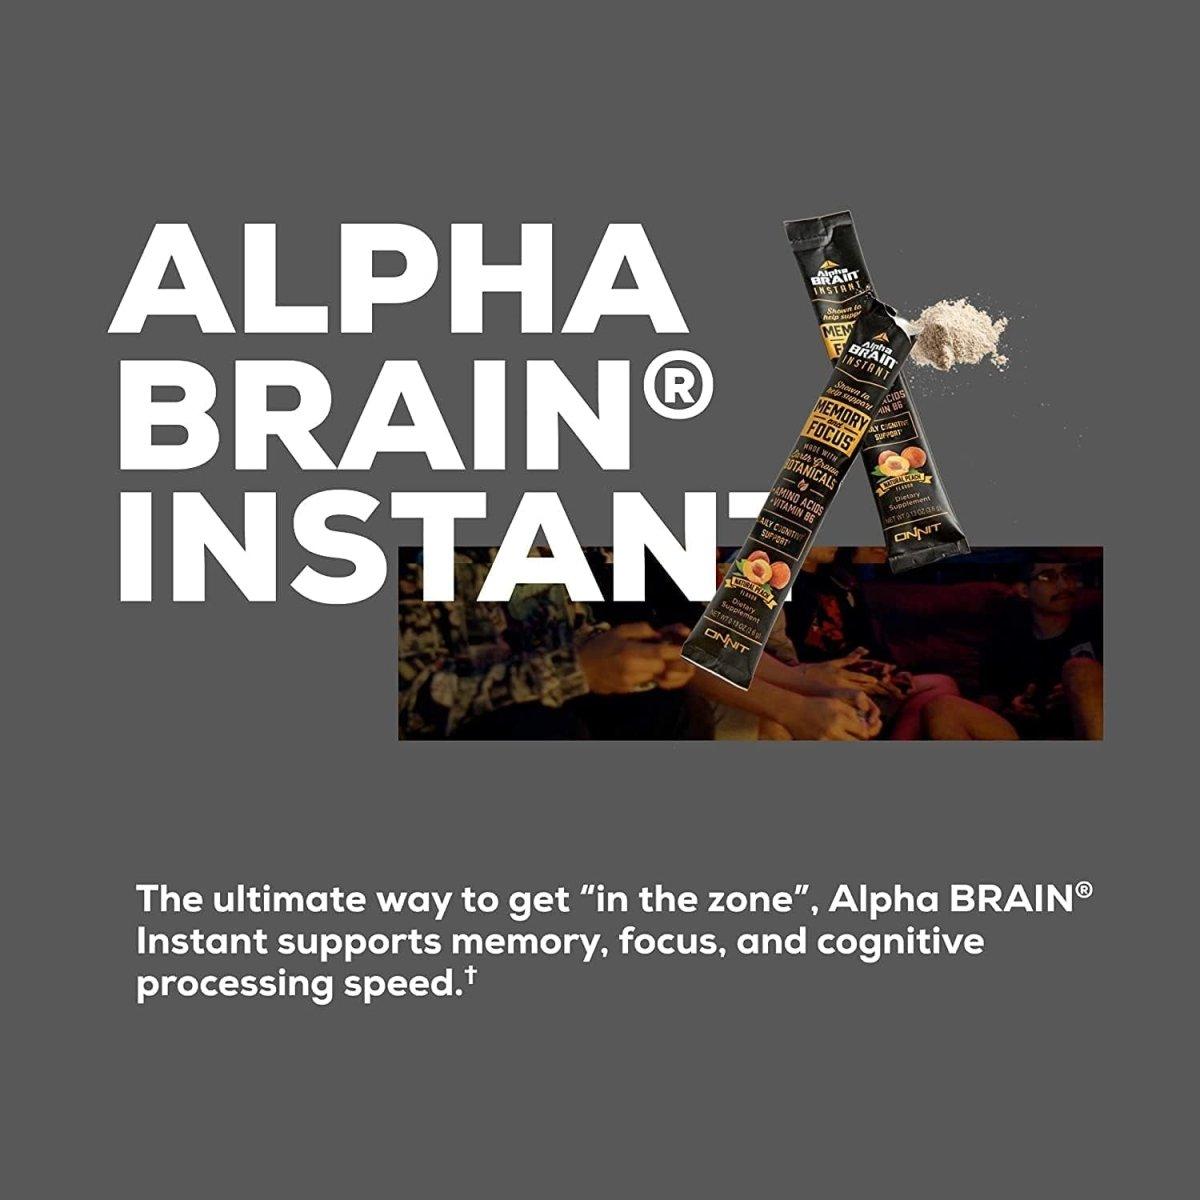 Onnit Alpha Brain Instant (30Ct Box) - Premium Nootropic Brain Booster Supplement - Boost Focus, Concentration & Memory - Alpha GPC, L Theanine, Bacopa Monnieri, Huperzine A, Vitamin B6 - Glam Global UK